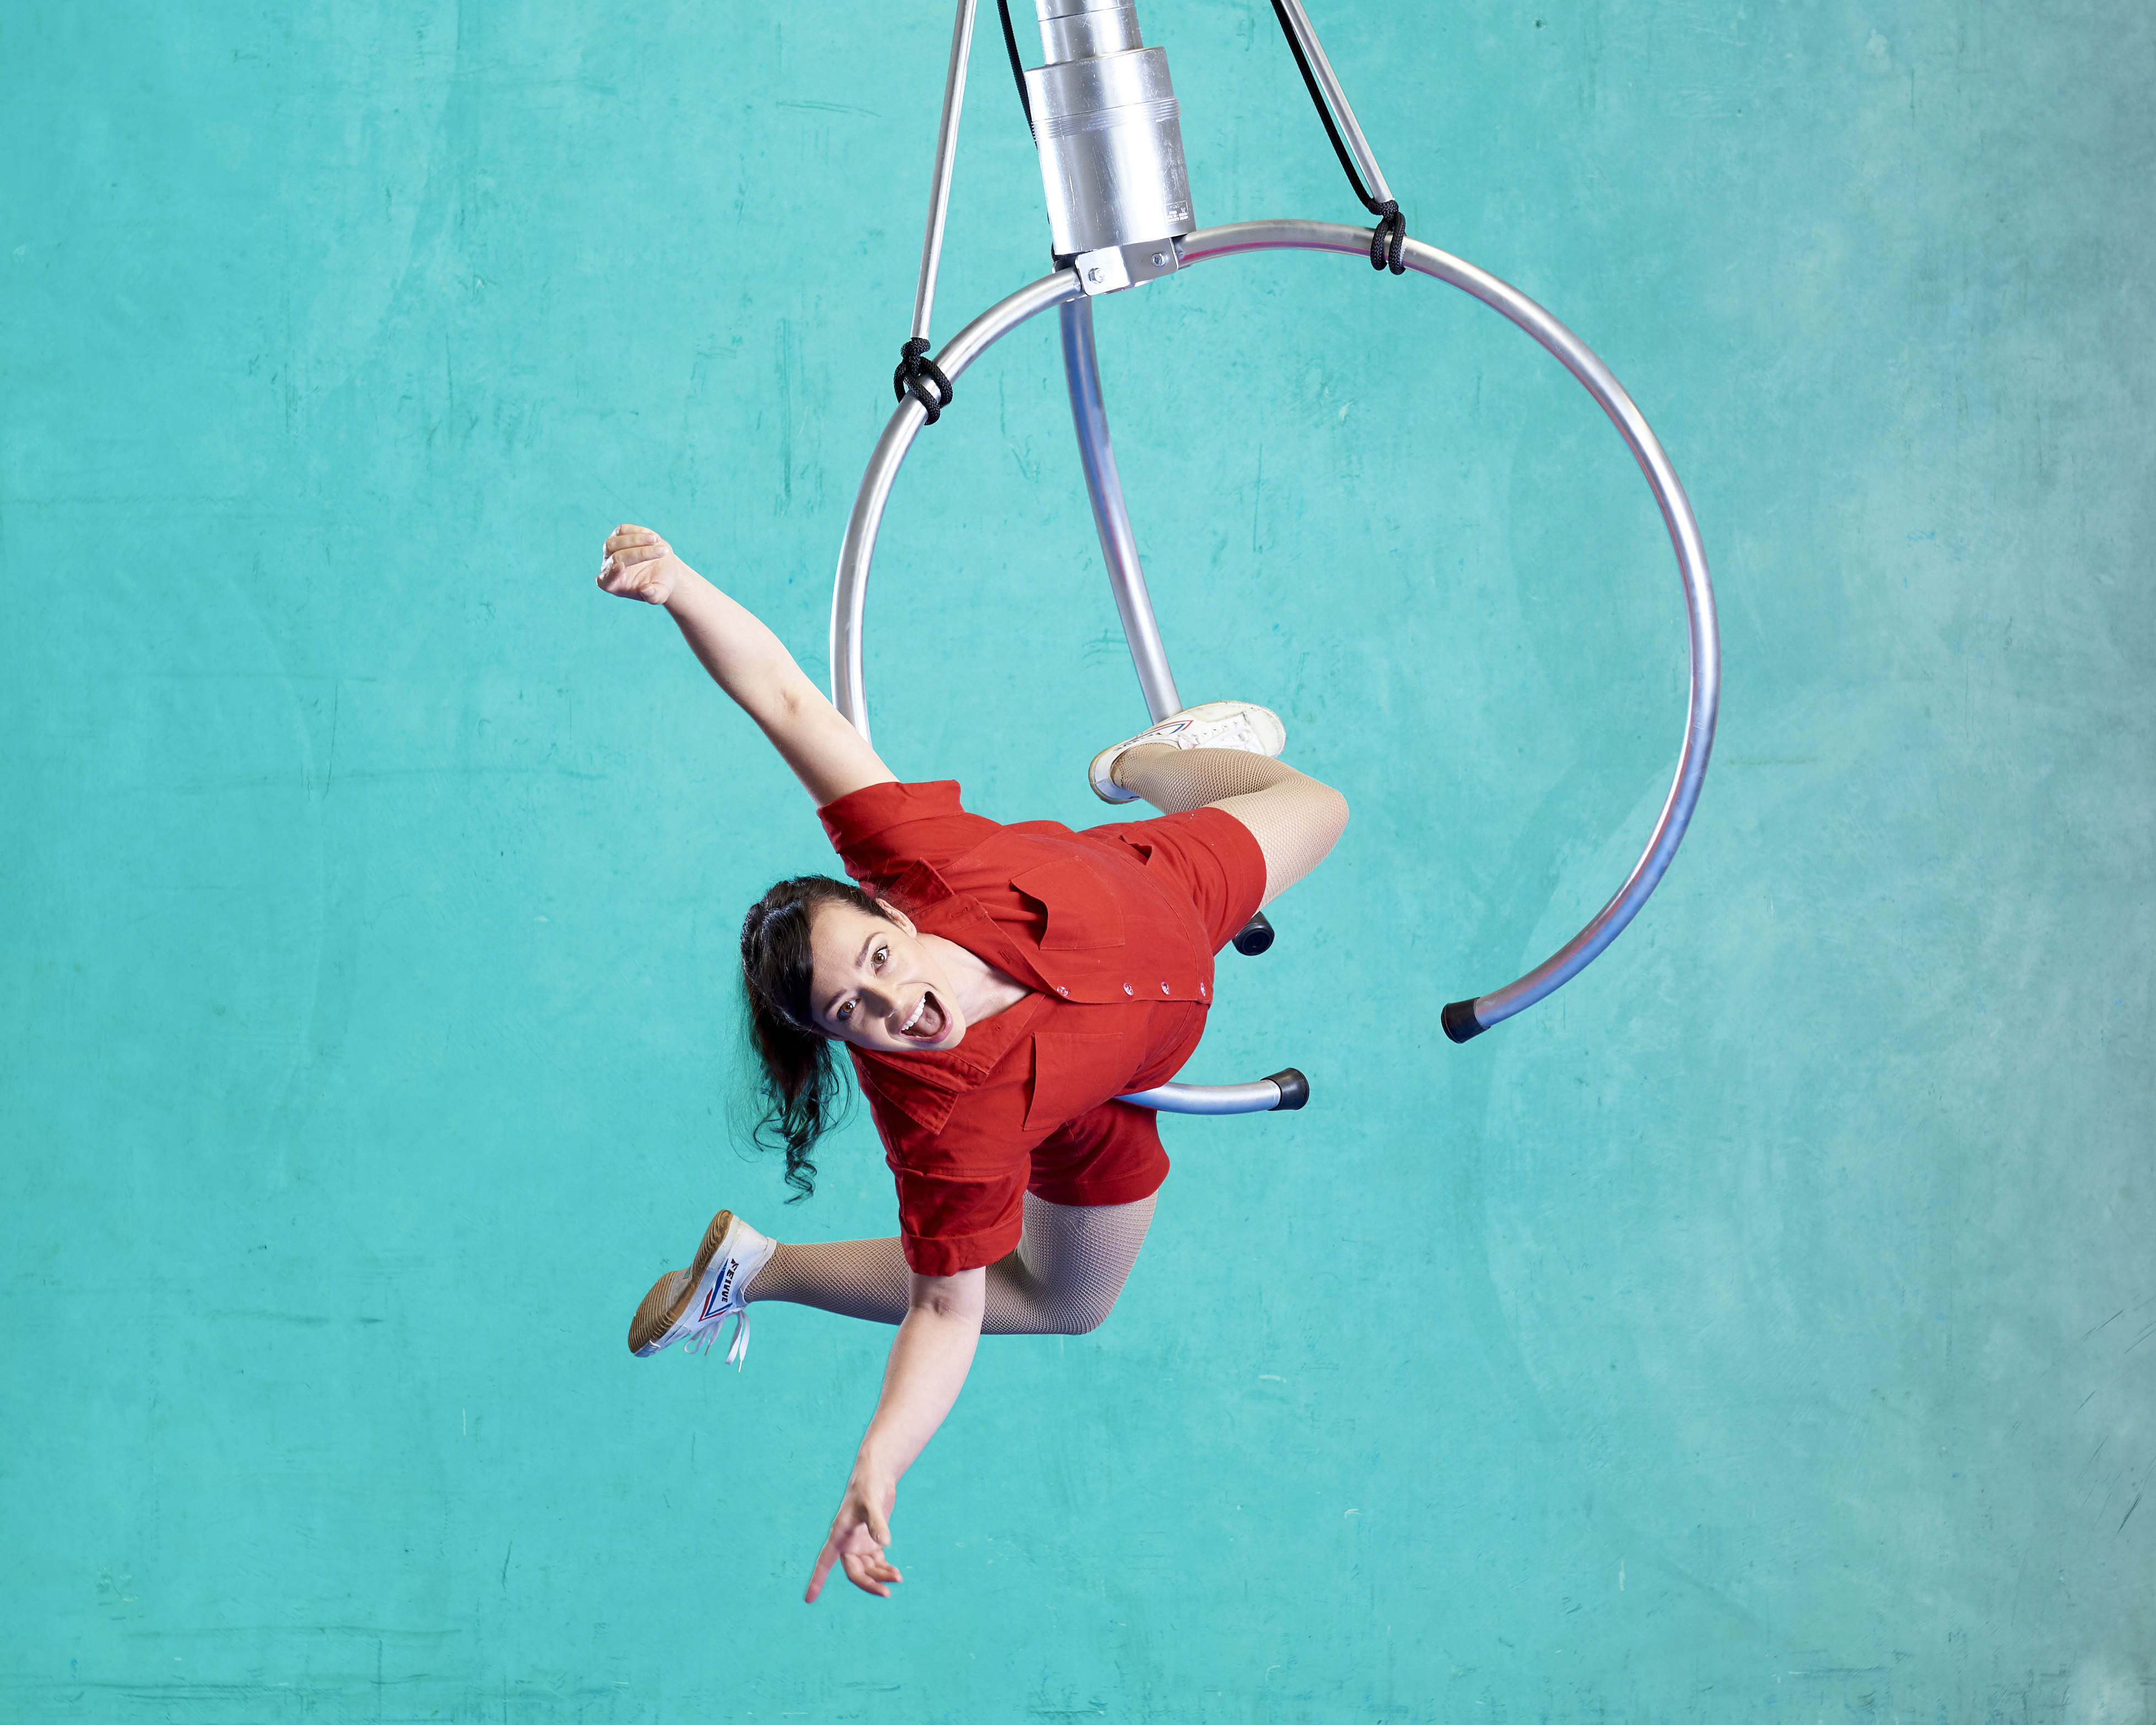 Circus performer hangs upside down on a ring. 